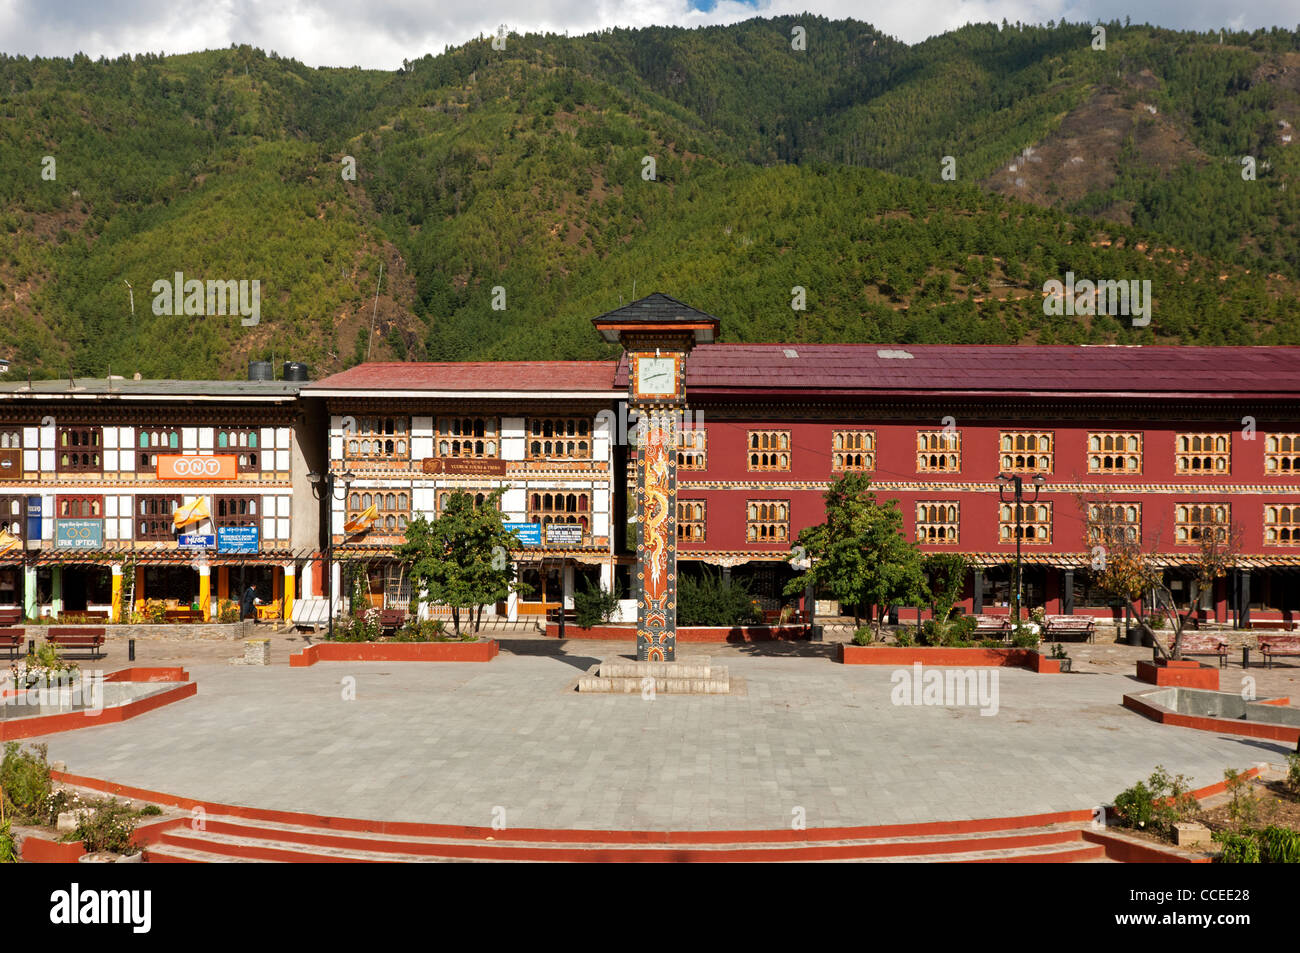 The central square with the clock tower in Thimphu, Bhutan Stock Photo